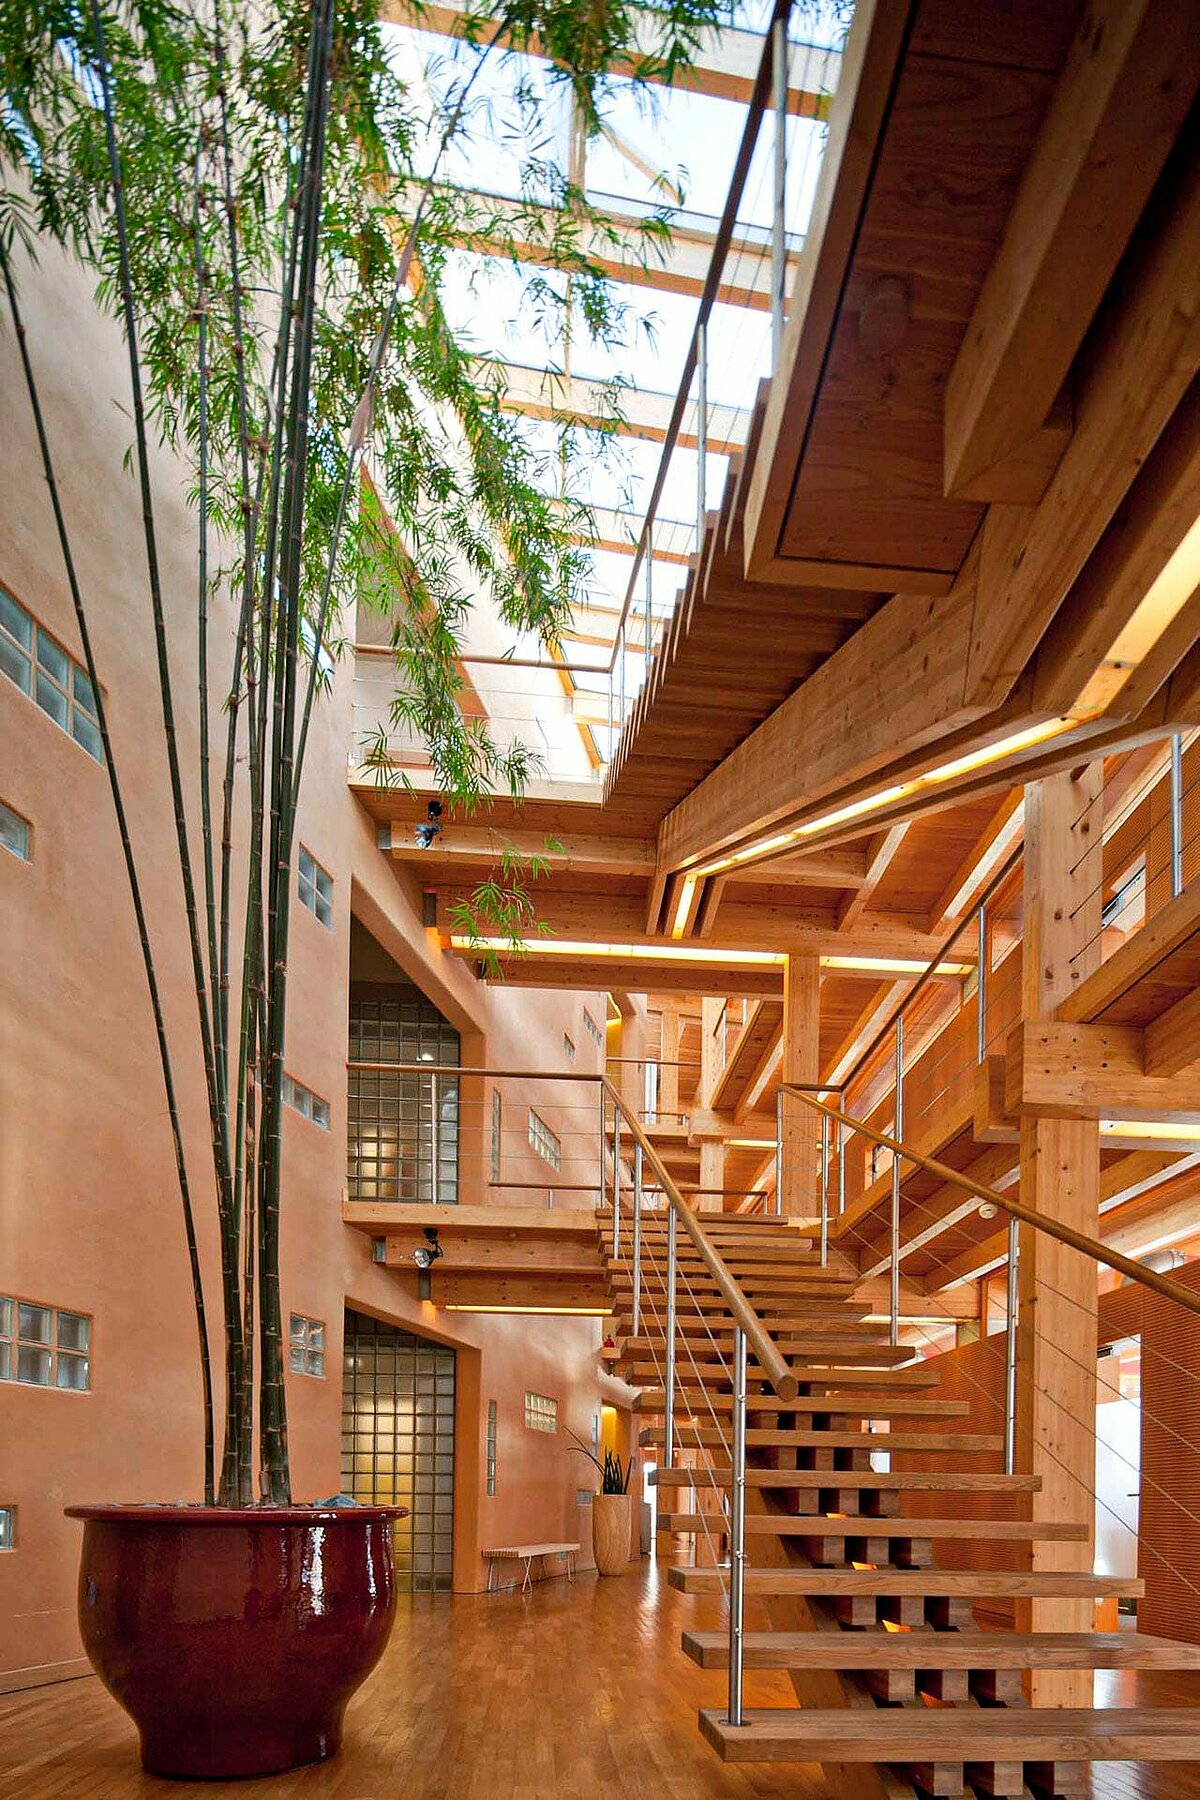 CR3 Decaffeination and refinement company's office building made out of wood and sustainable resources